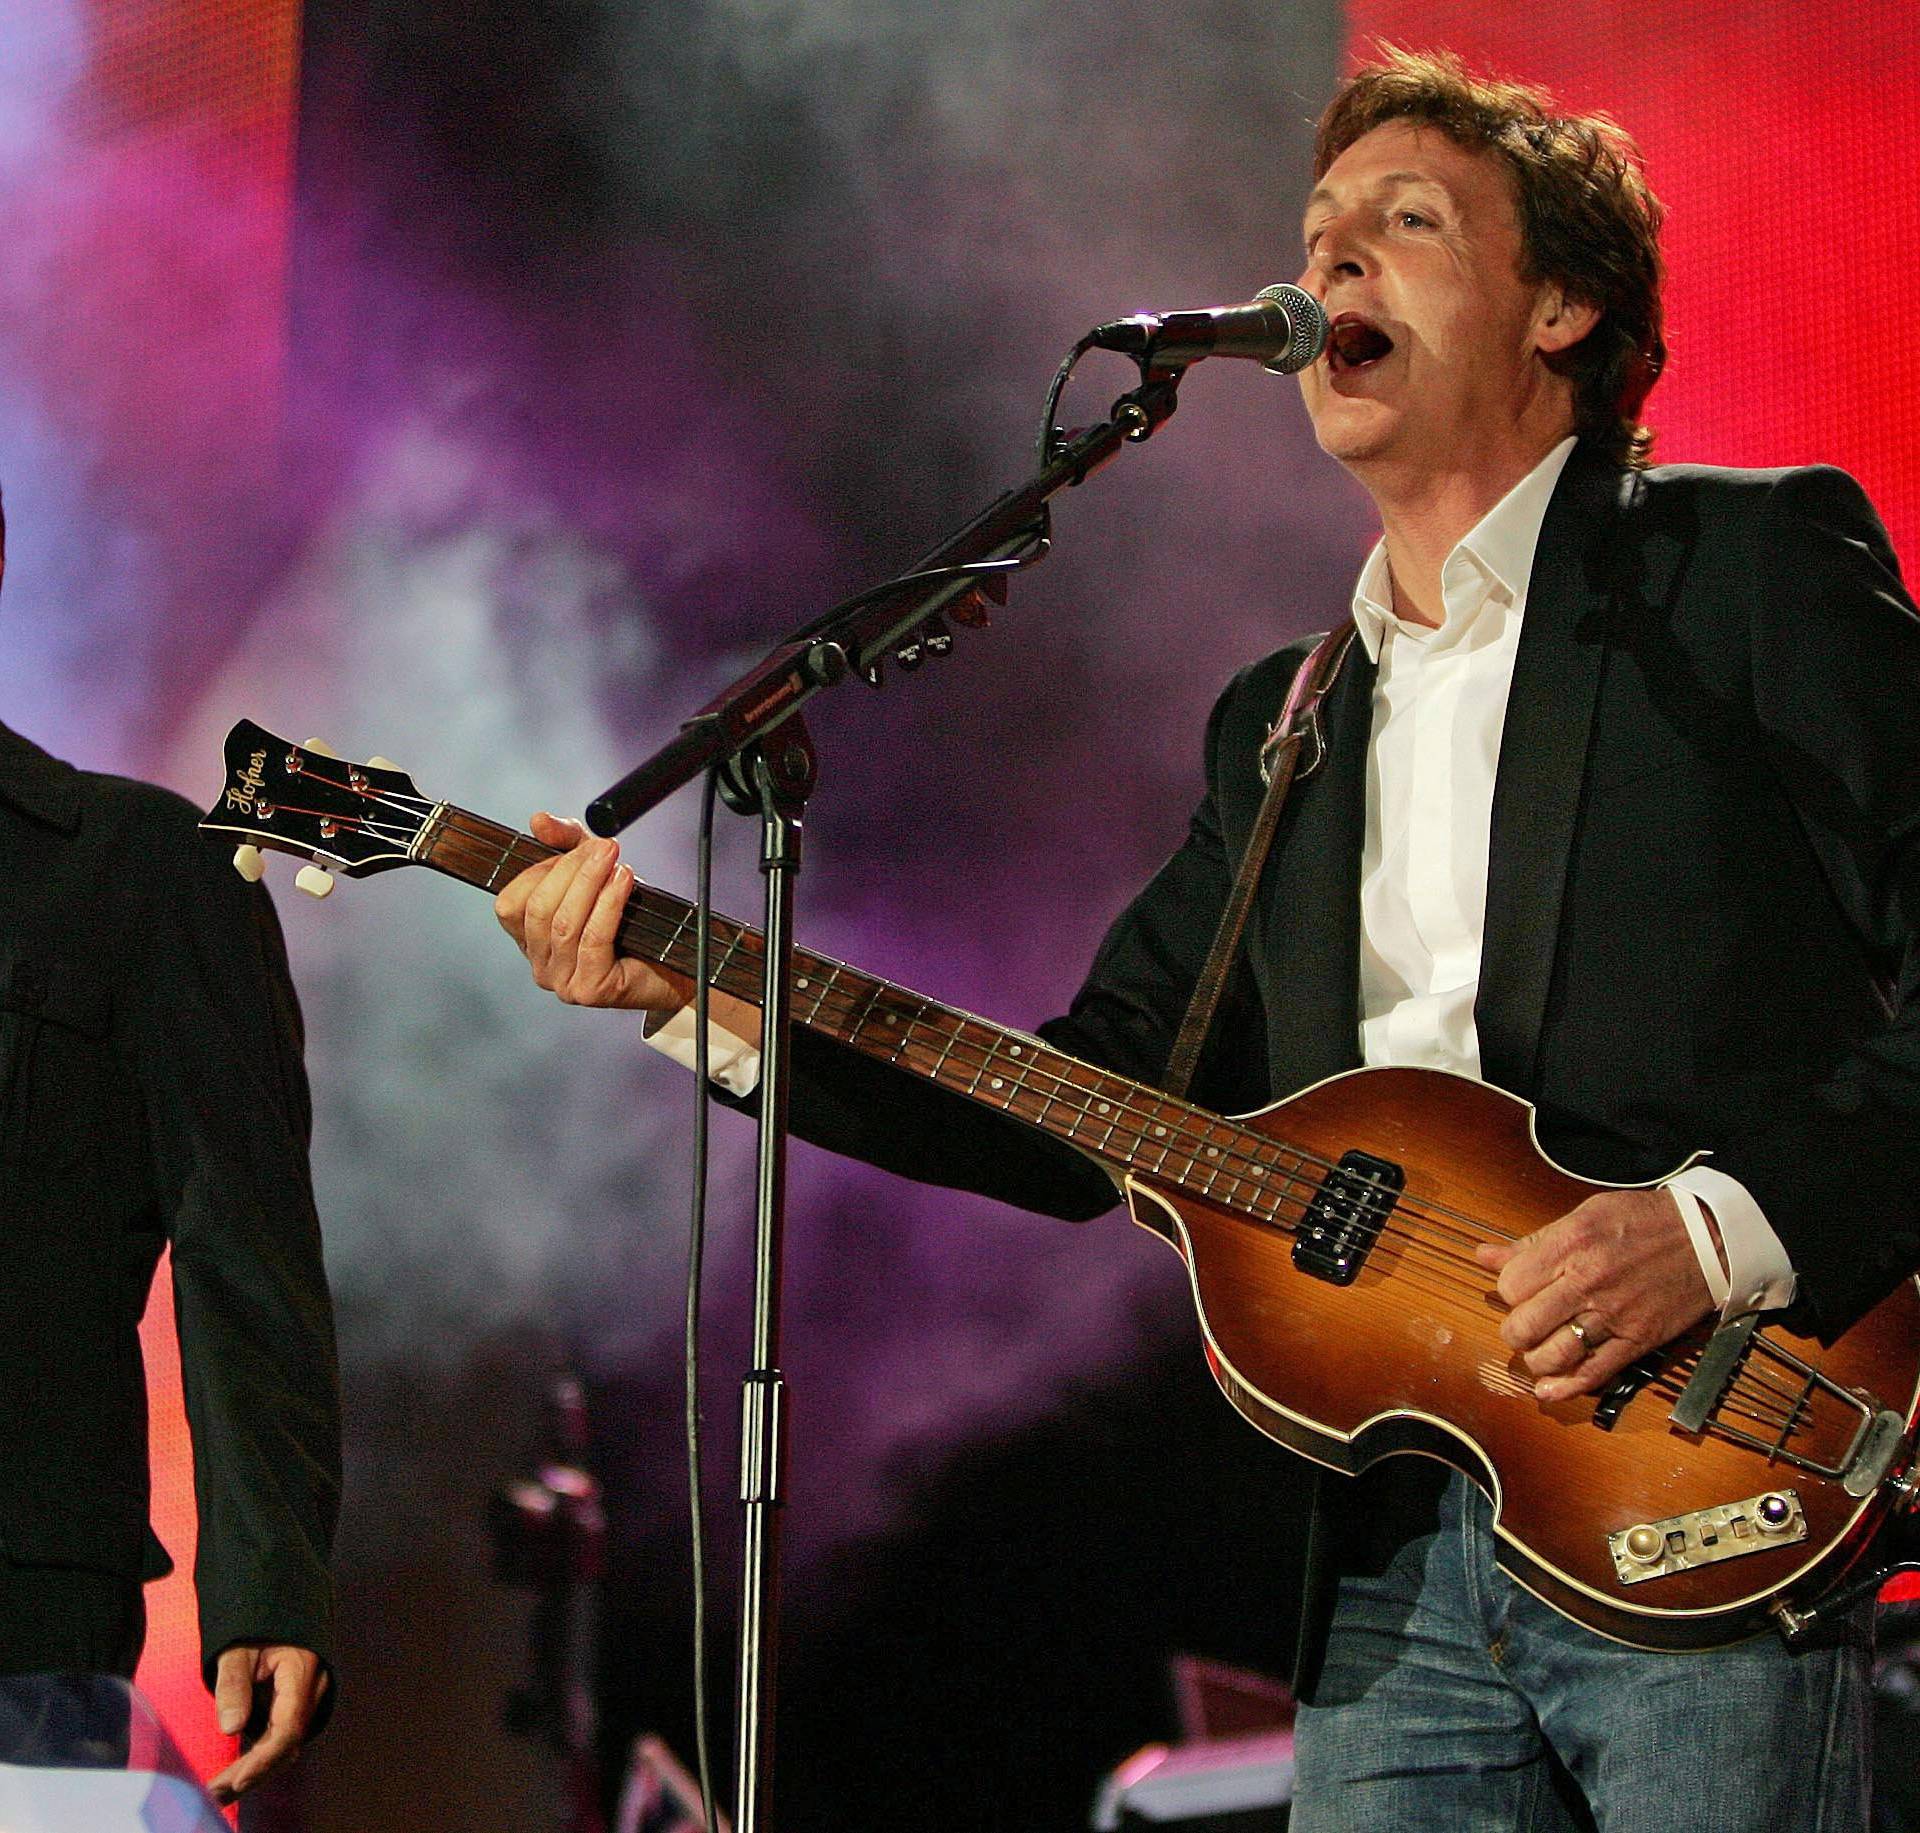 FILE PHOTO: British singers Paul McCartney and George Michael perform at the Live 8 concert in Hyde Park in London